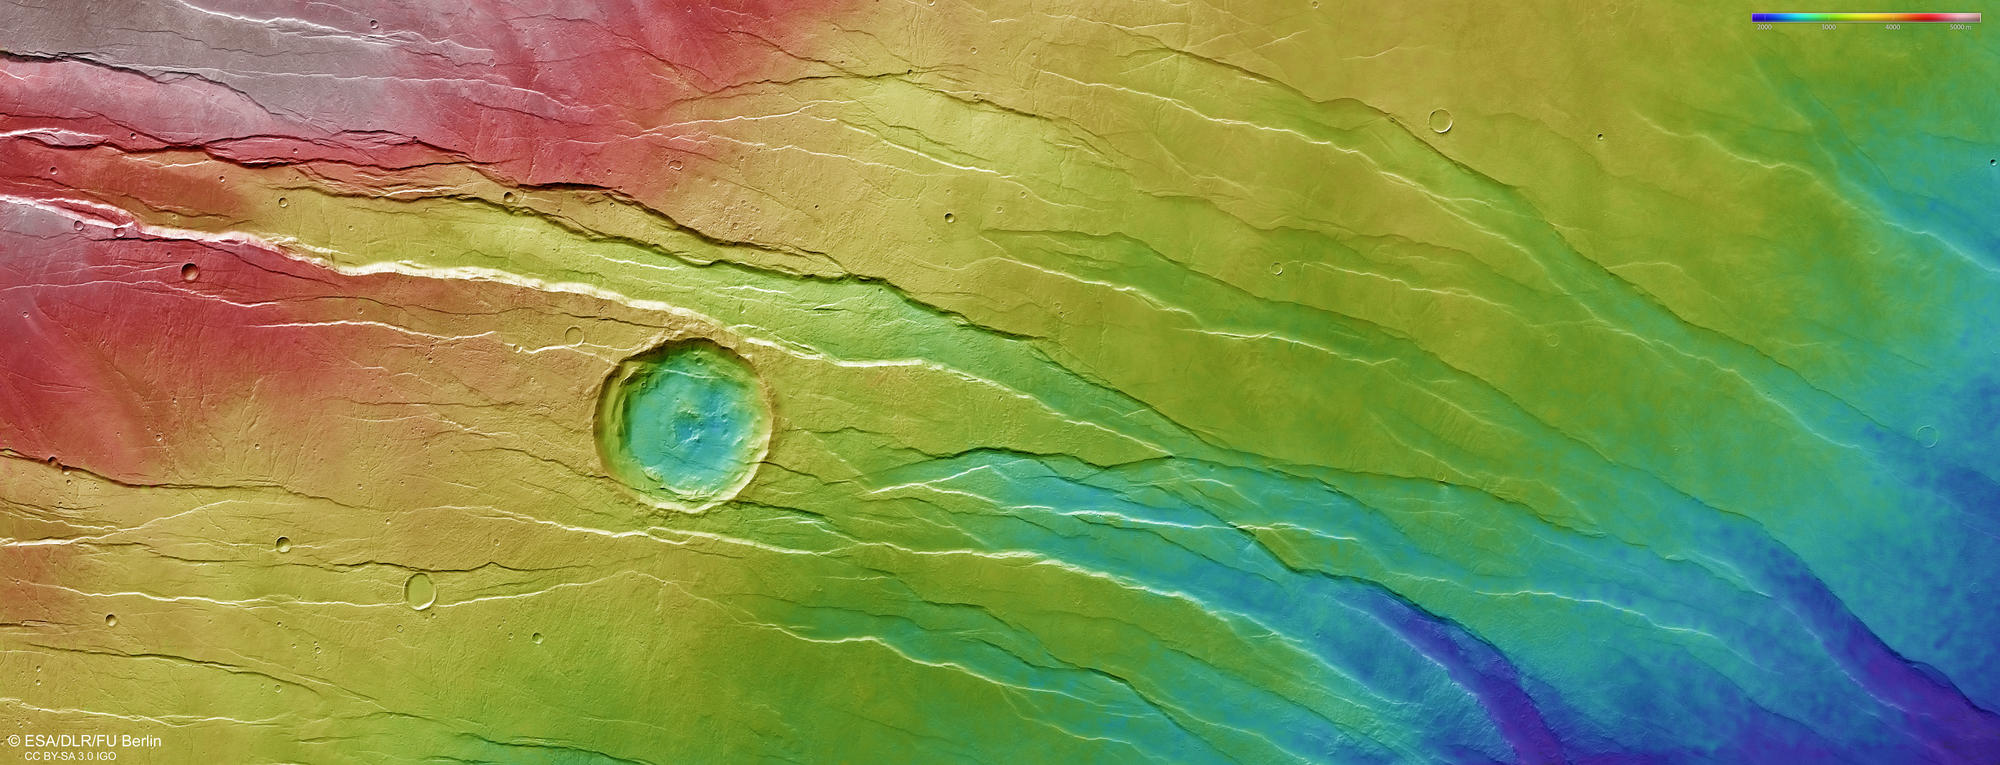 Tantalus Fossae - Farbcodiertes Höhenmodell